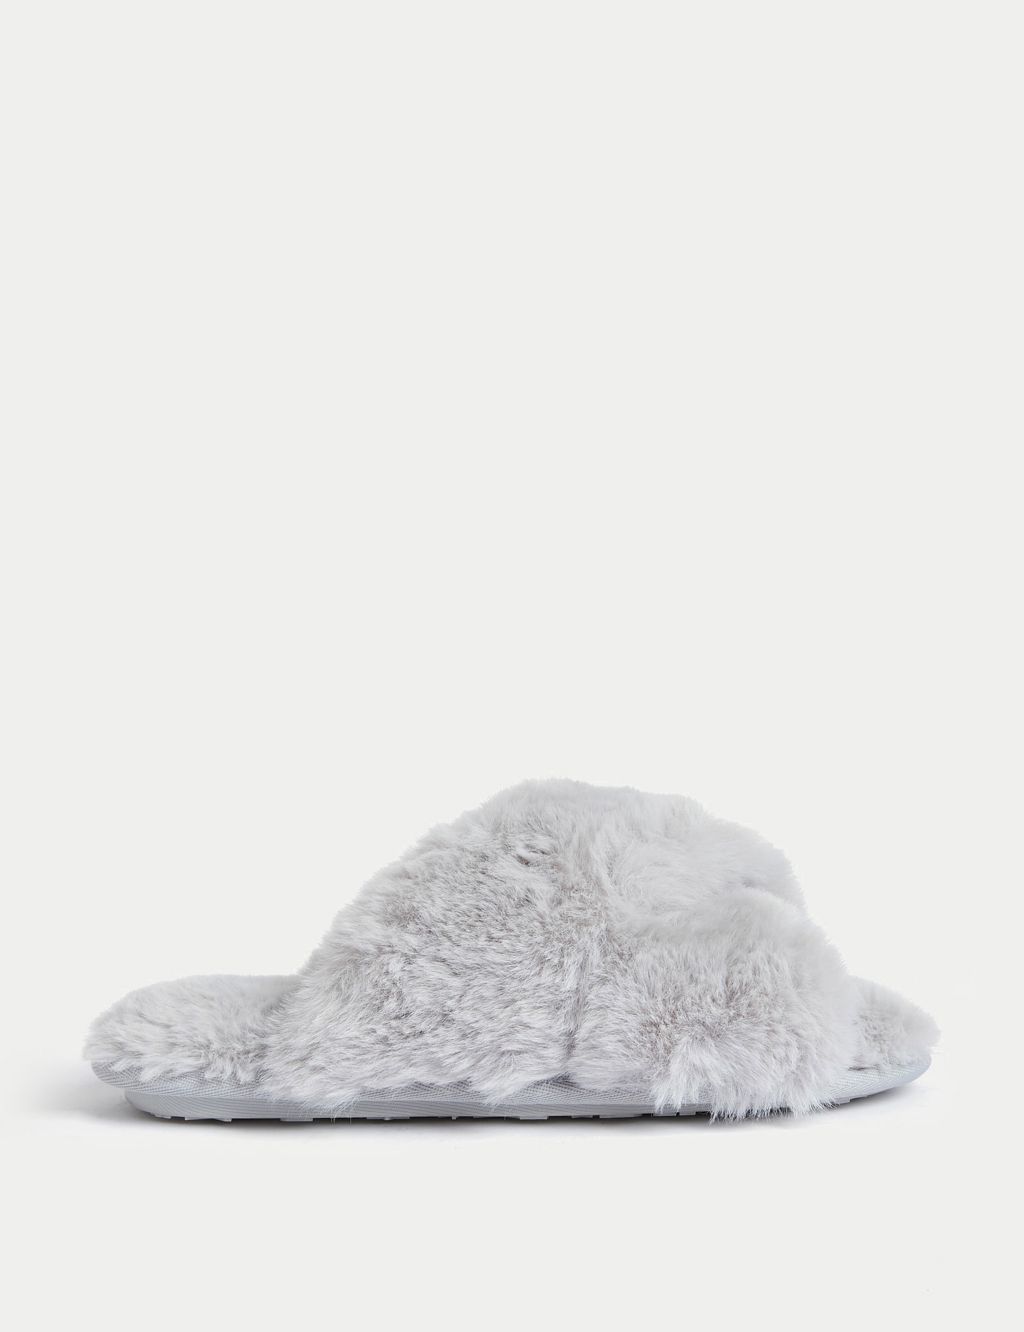 Faux Fur Crossover Slider Slippers image 1